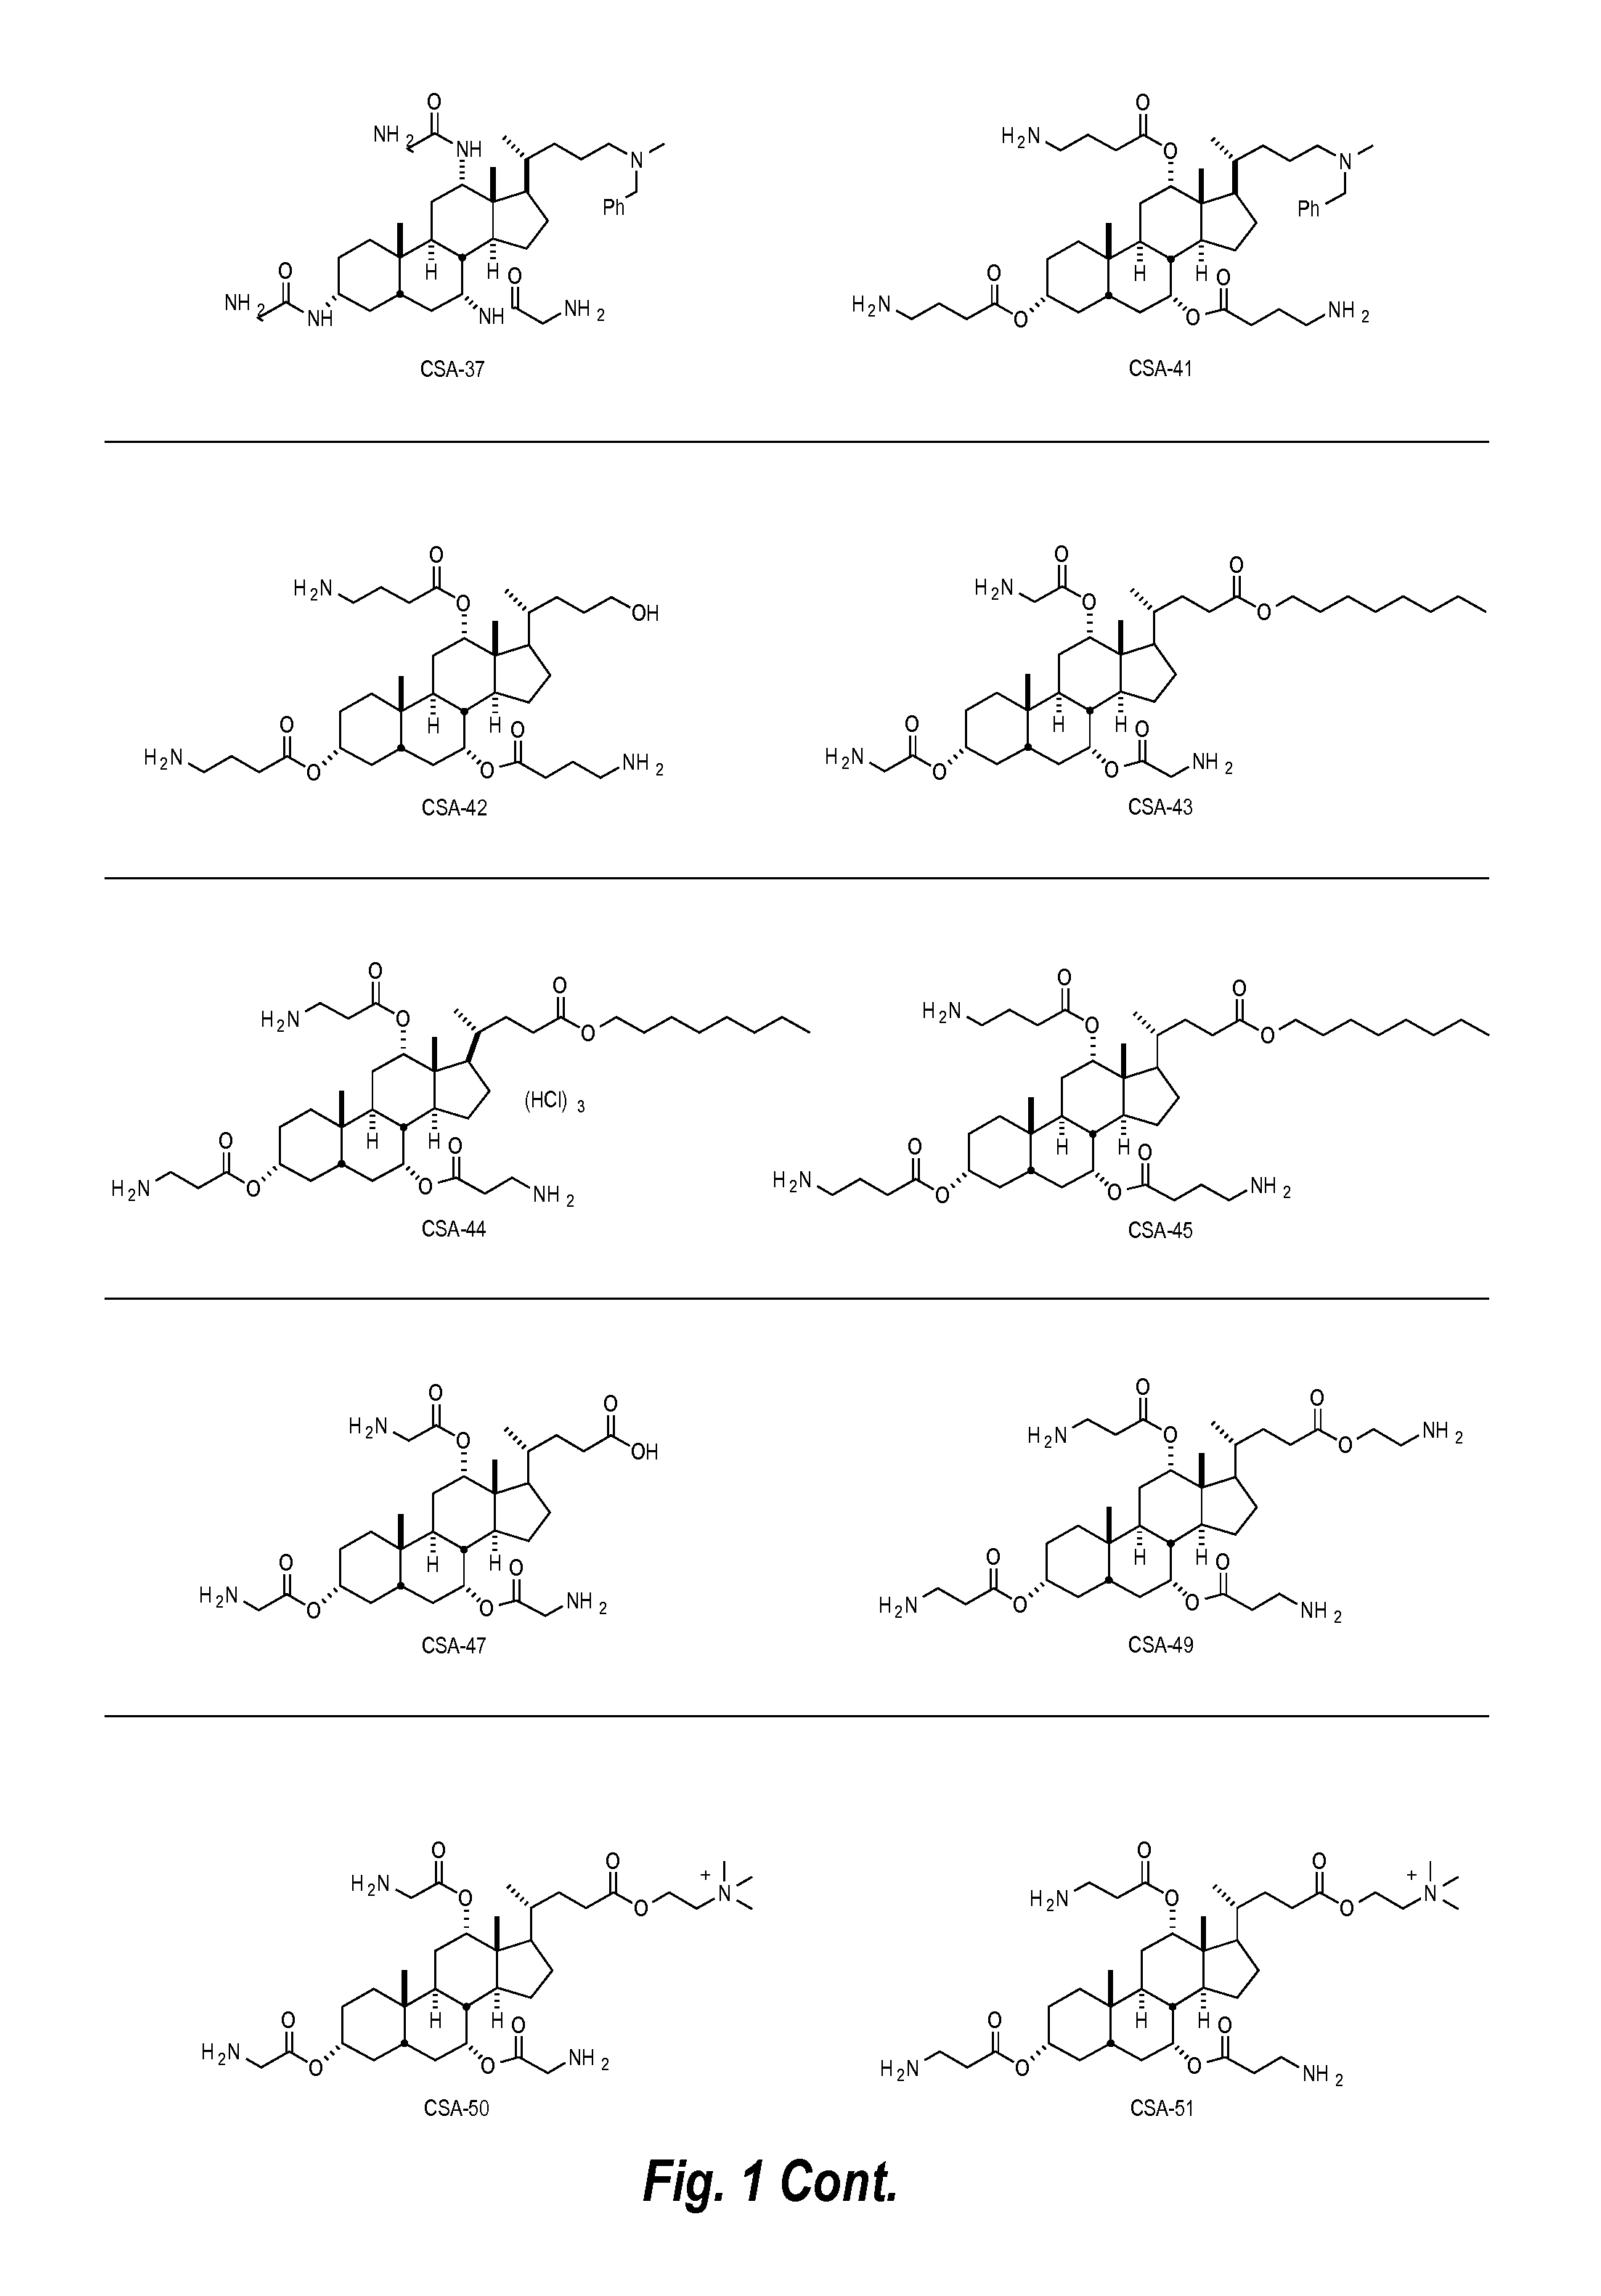 Articles incorporating absorbent polymer and ceragenin compound